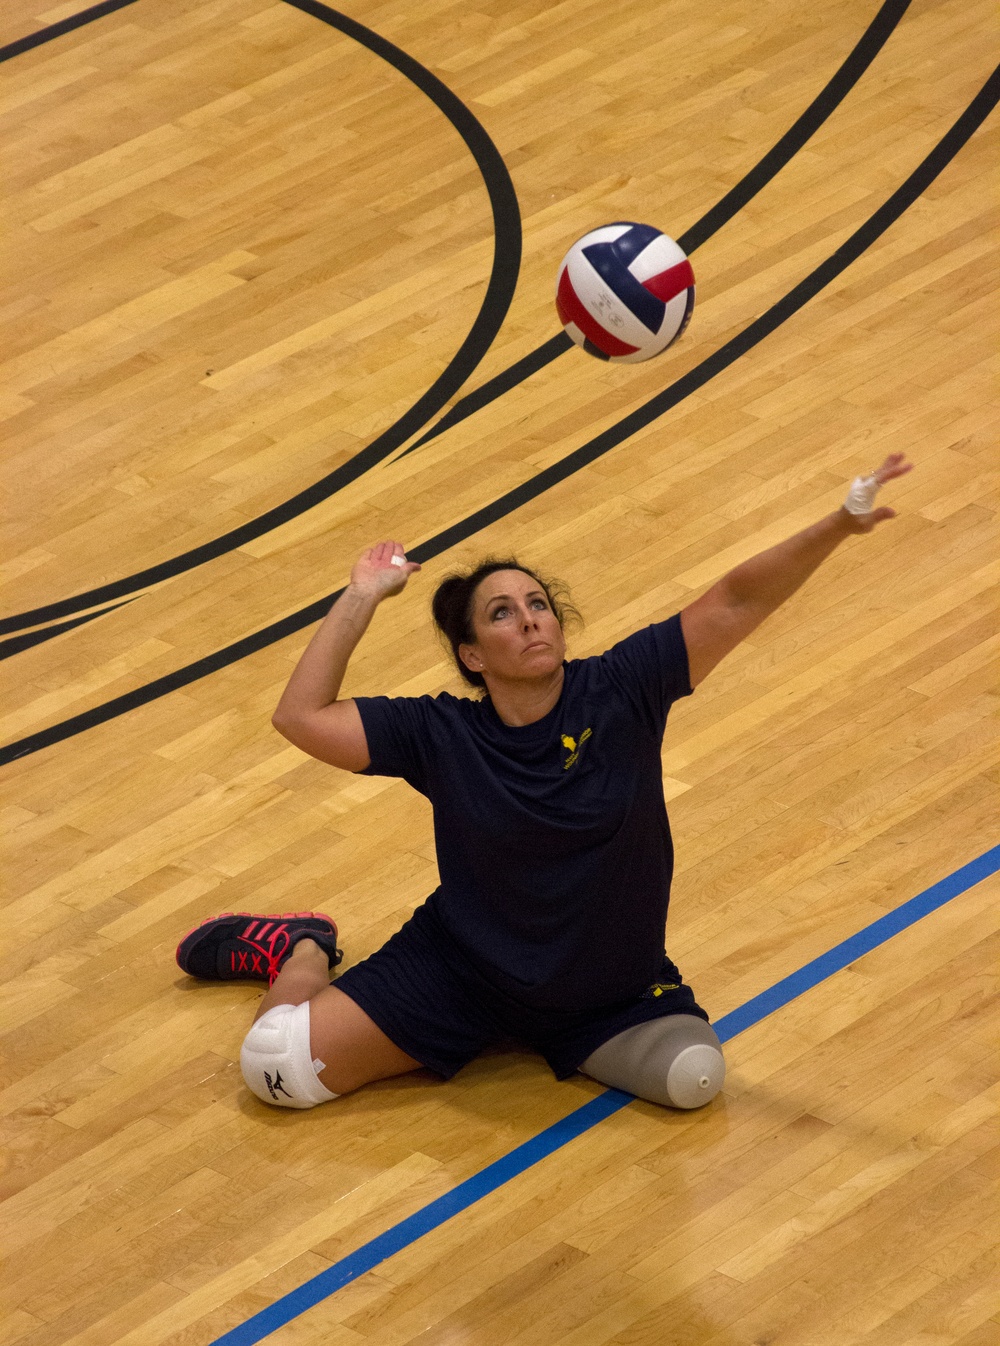 Navy competes in Sitting Volleyball at 2013 Warrior Games